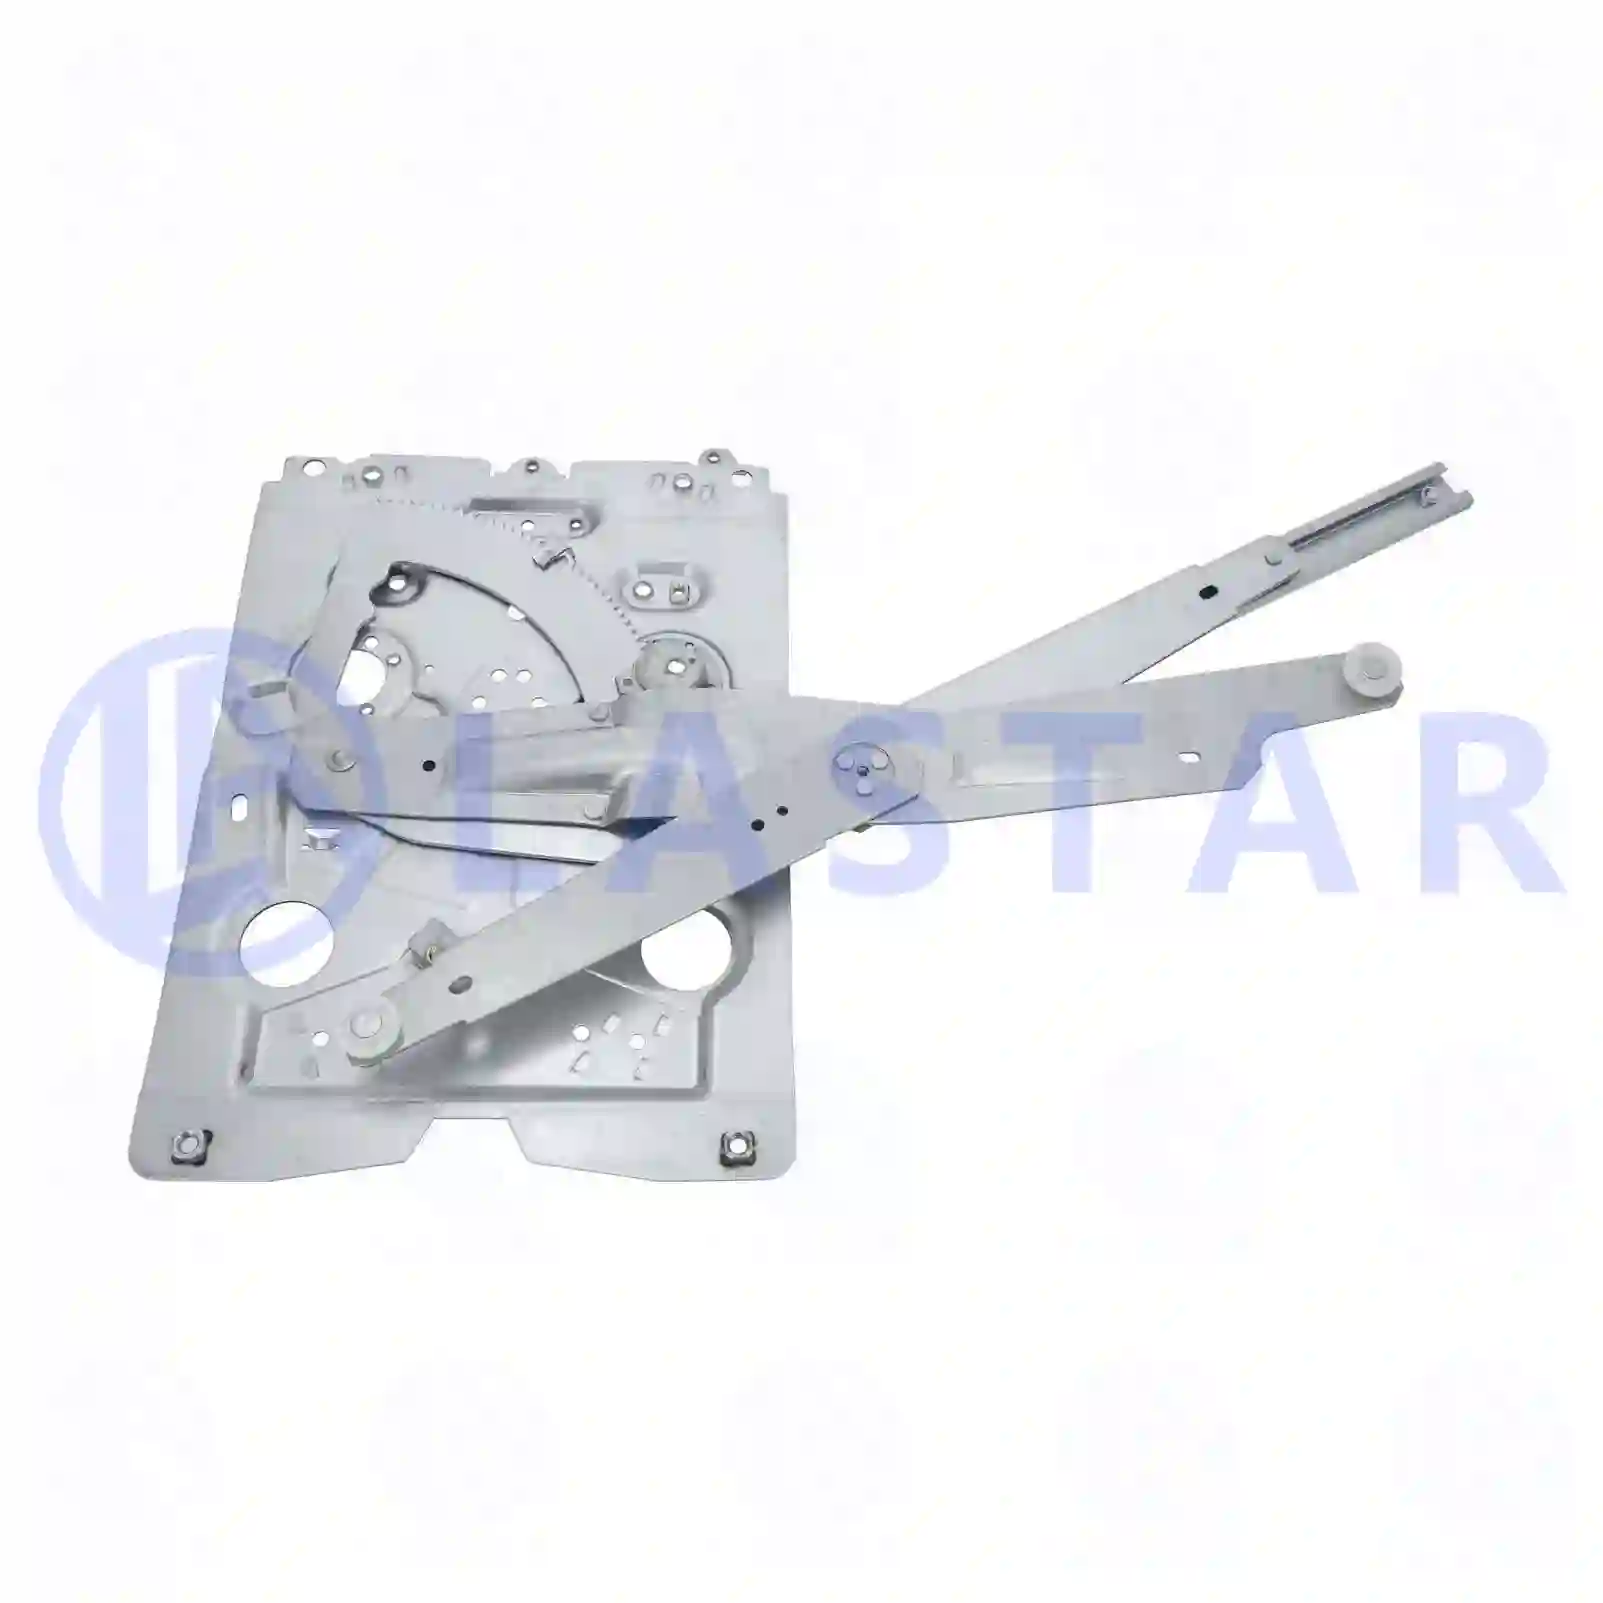 Window regulator, left, electrical, with motor, 77721194, 3176545, ZG61296-0008, ||  77721194 Lastar Spare Part | Truck Spare Parts, Auotomotive Spare Parts Window regulator, left, electrical, with motor, 77721194, 3176545, ZG61296-0008, ||  77721194 Lastar Spare Part | Truck Spare Parts, Auotomotive Spare Parts